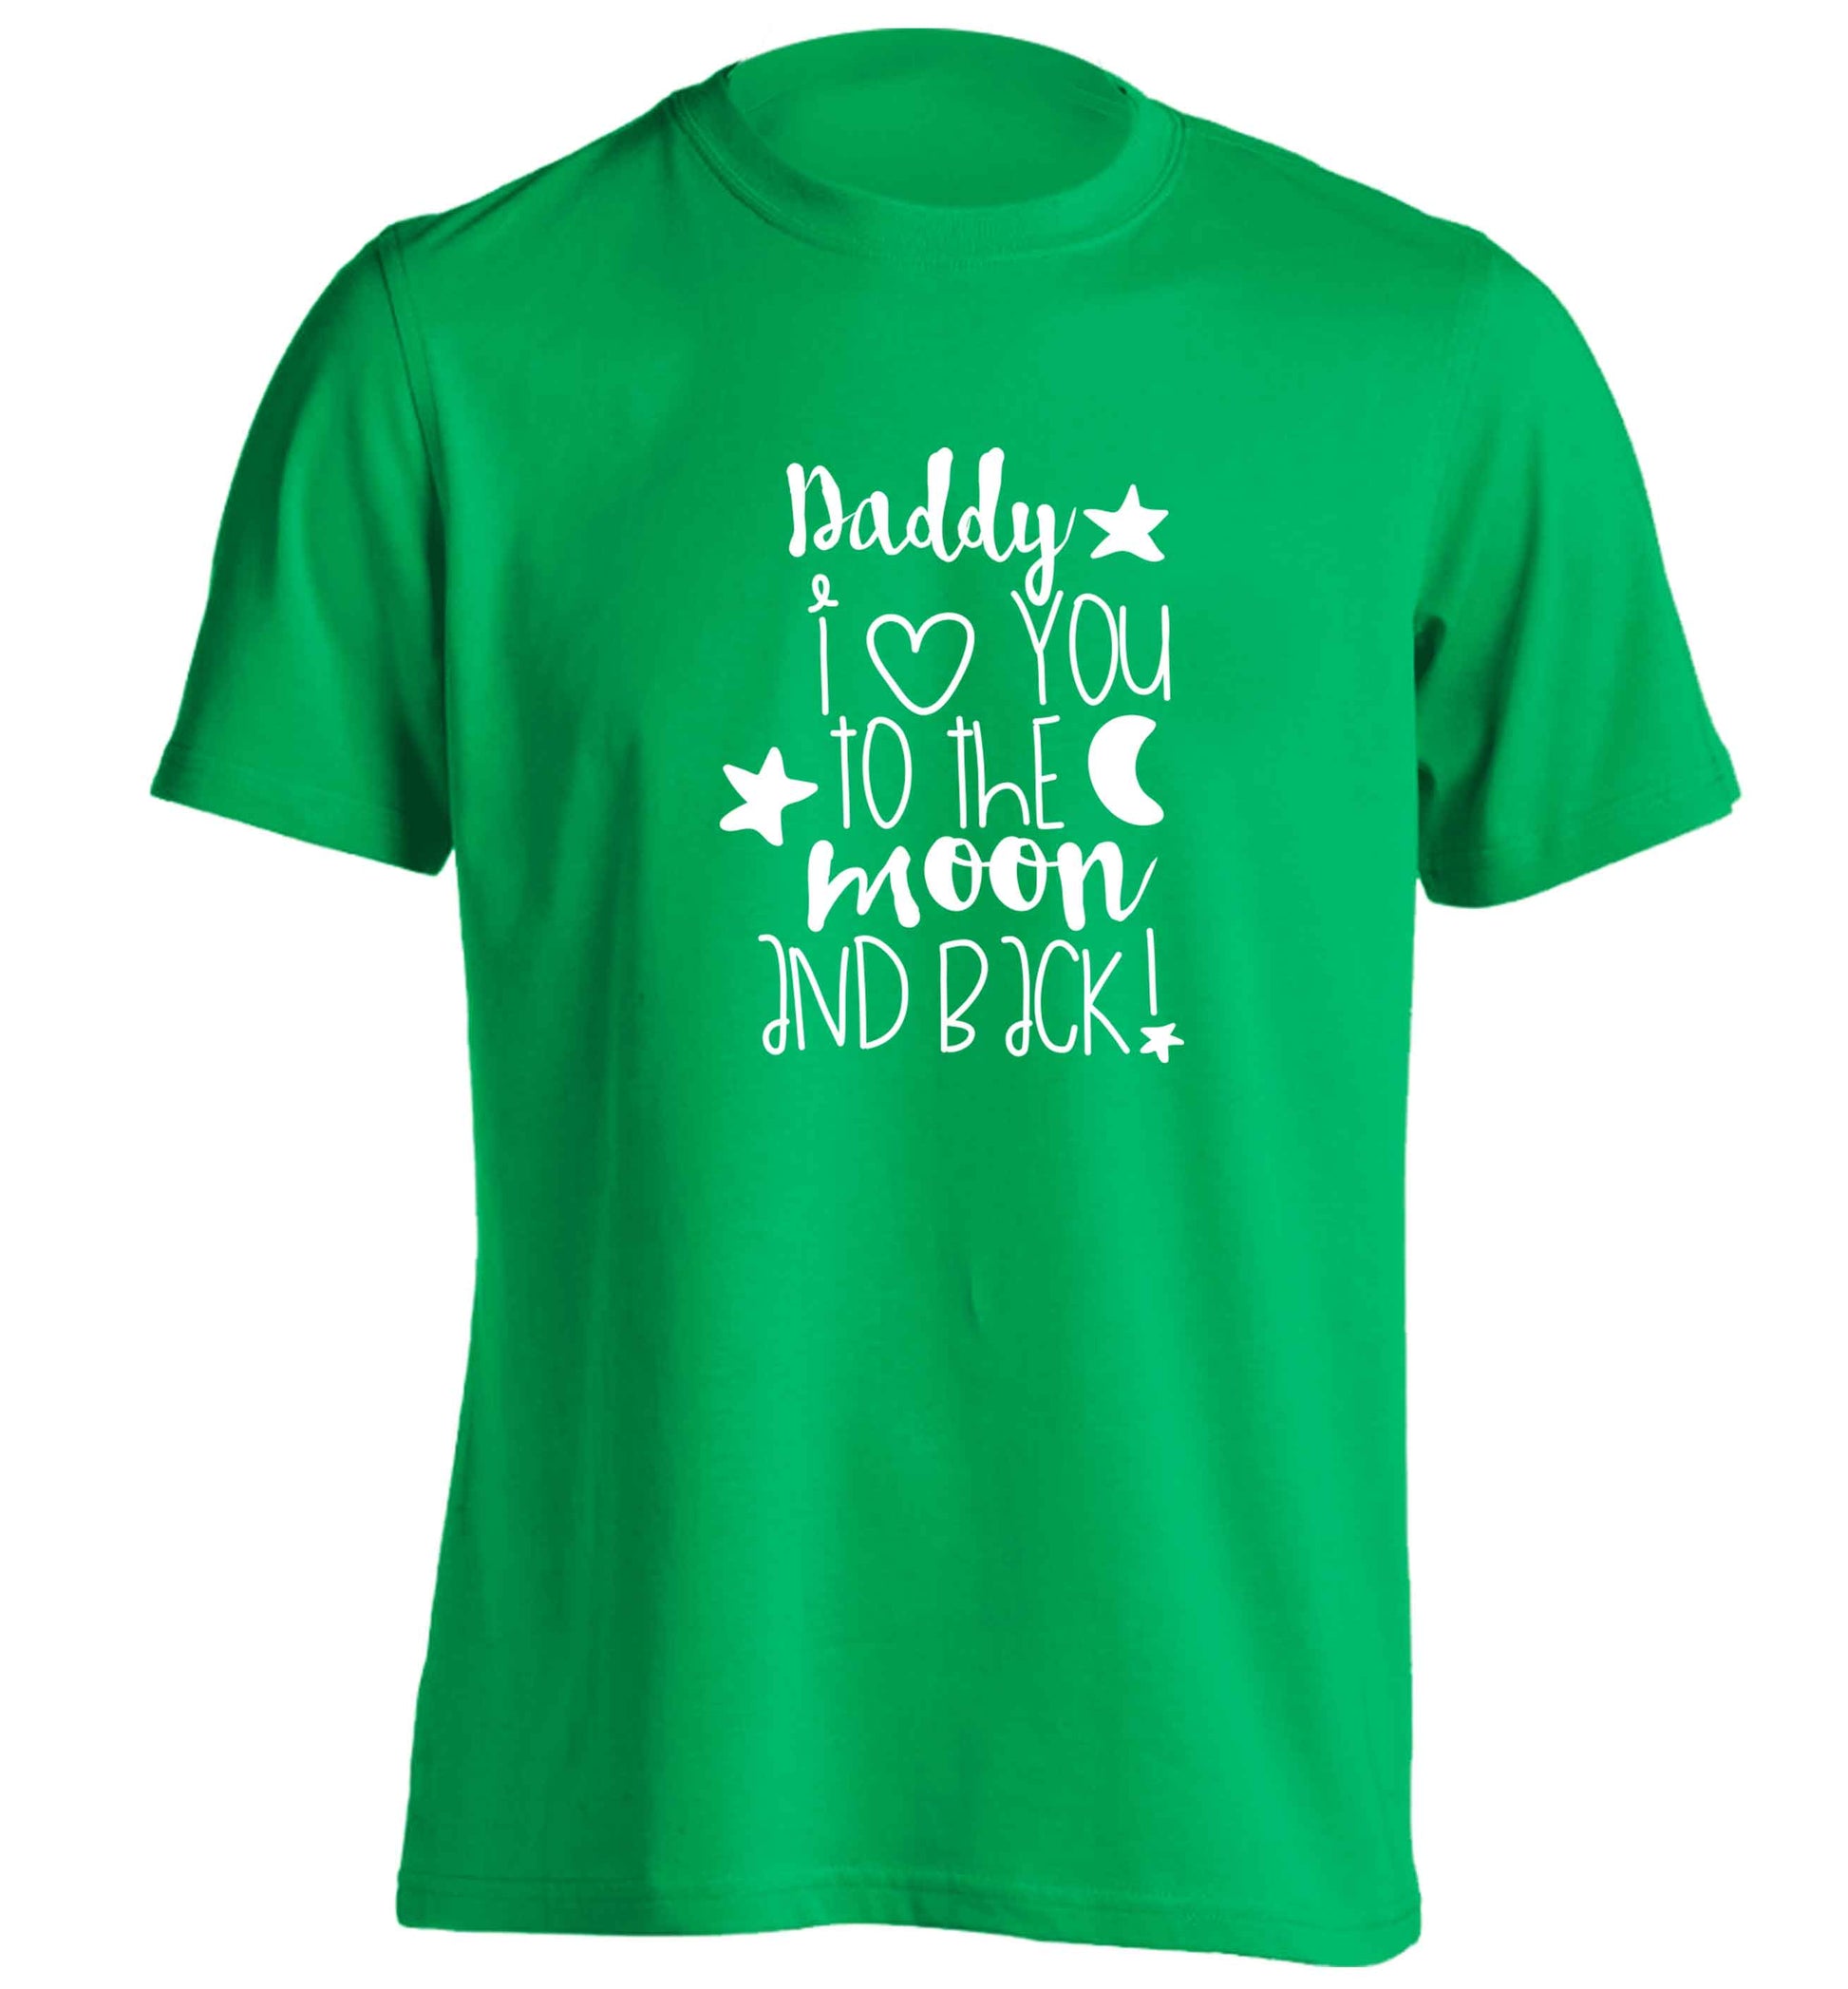 Daddy I love you to the moon and back adults unisex green Tshirt 2XL